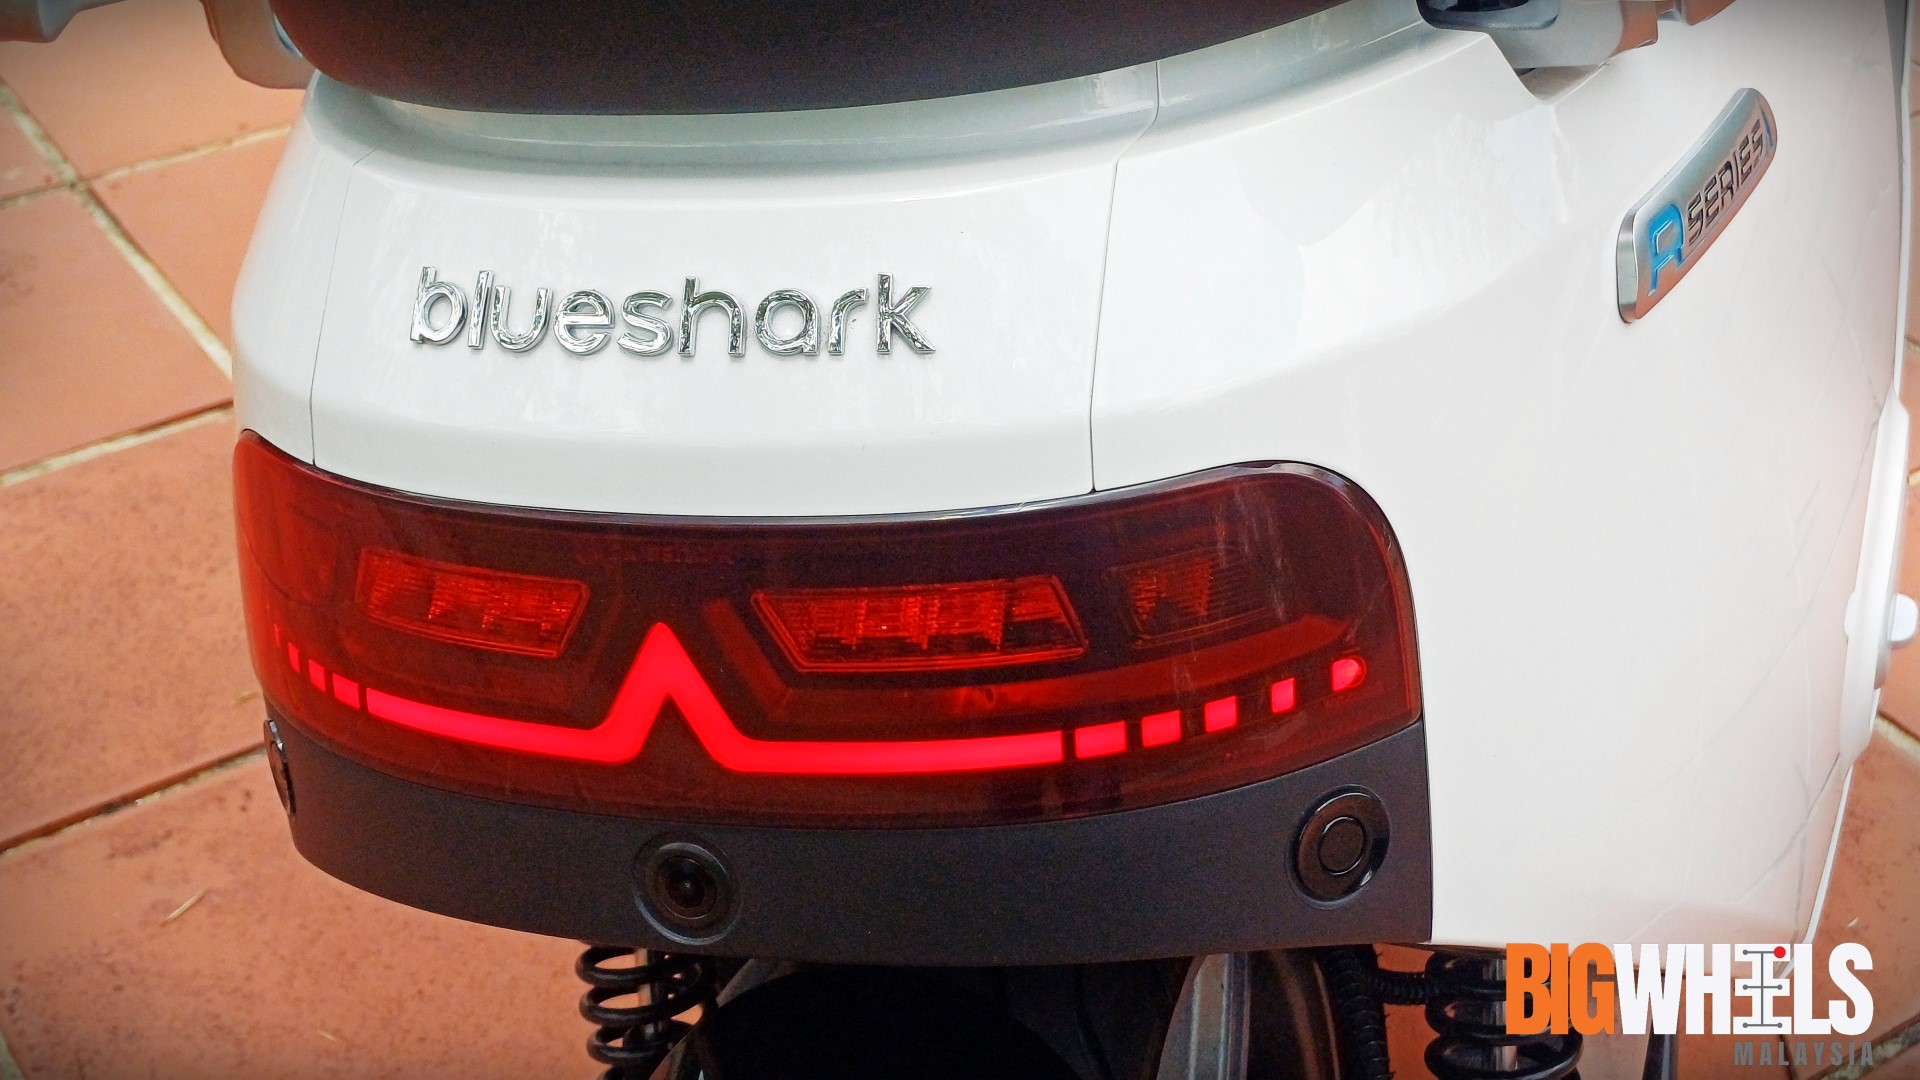 Blueshark R1 electric scooter review: Perfectly functional